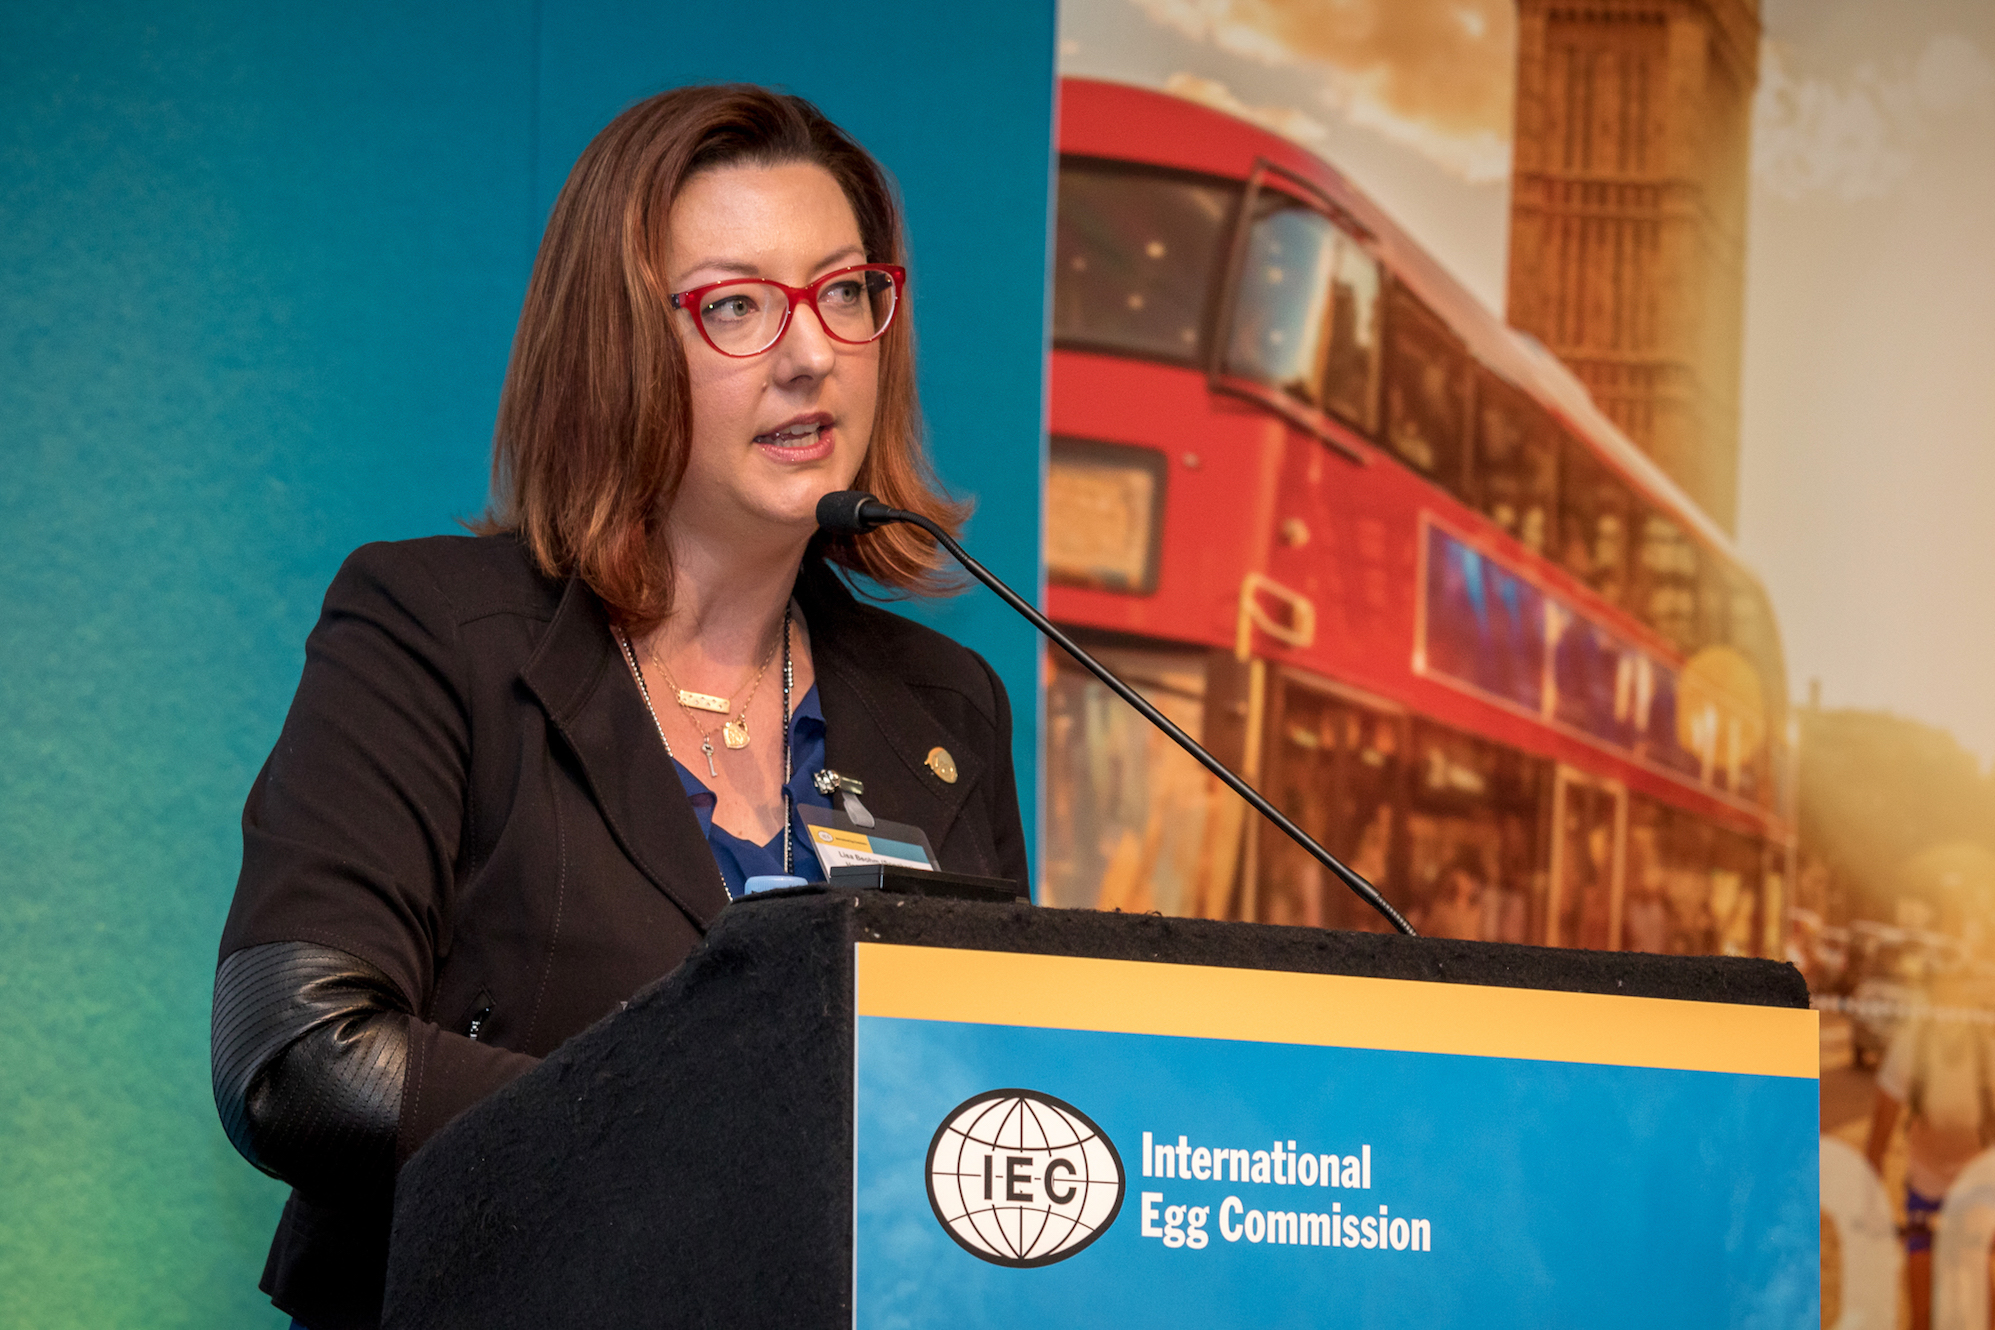 Lisa Beohm speaking at the IEC Business Conference in London, 2018